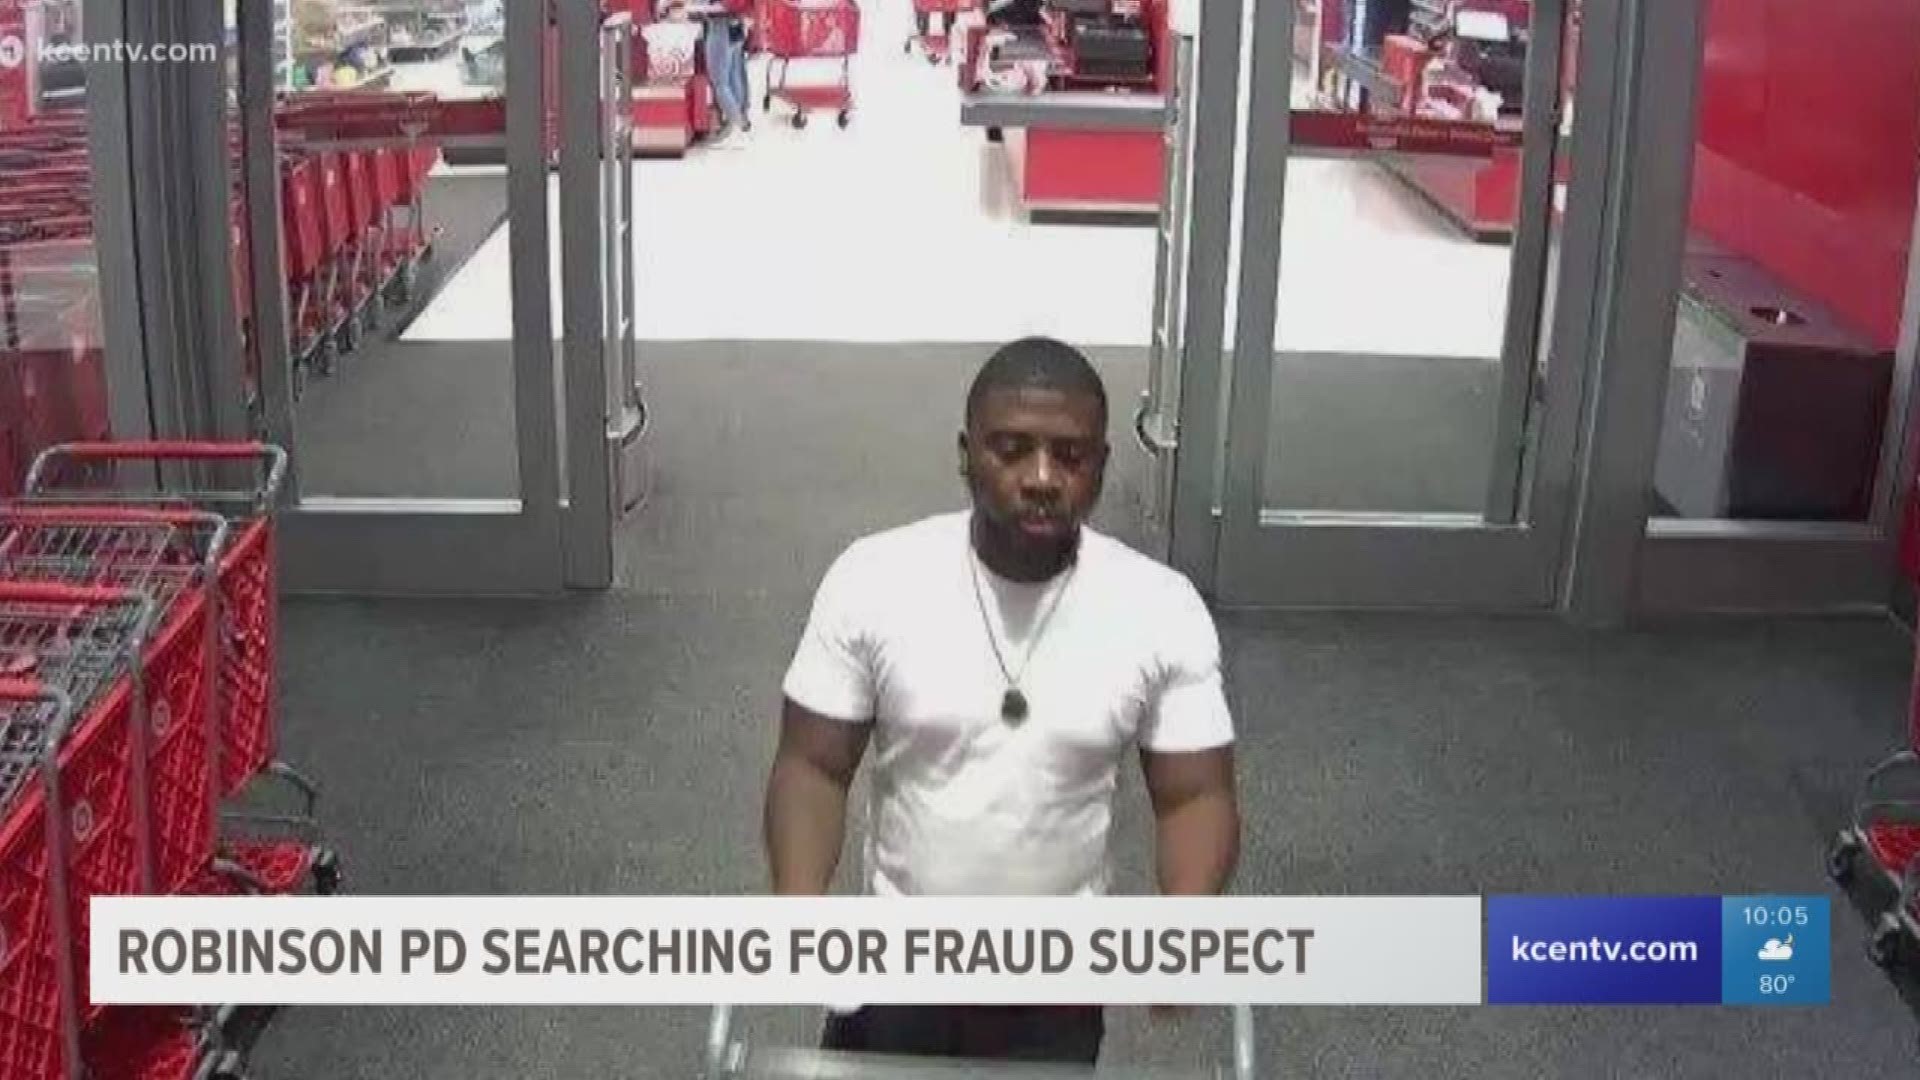 Robinson police are looking for a suspect involved in a fraud case.